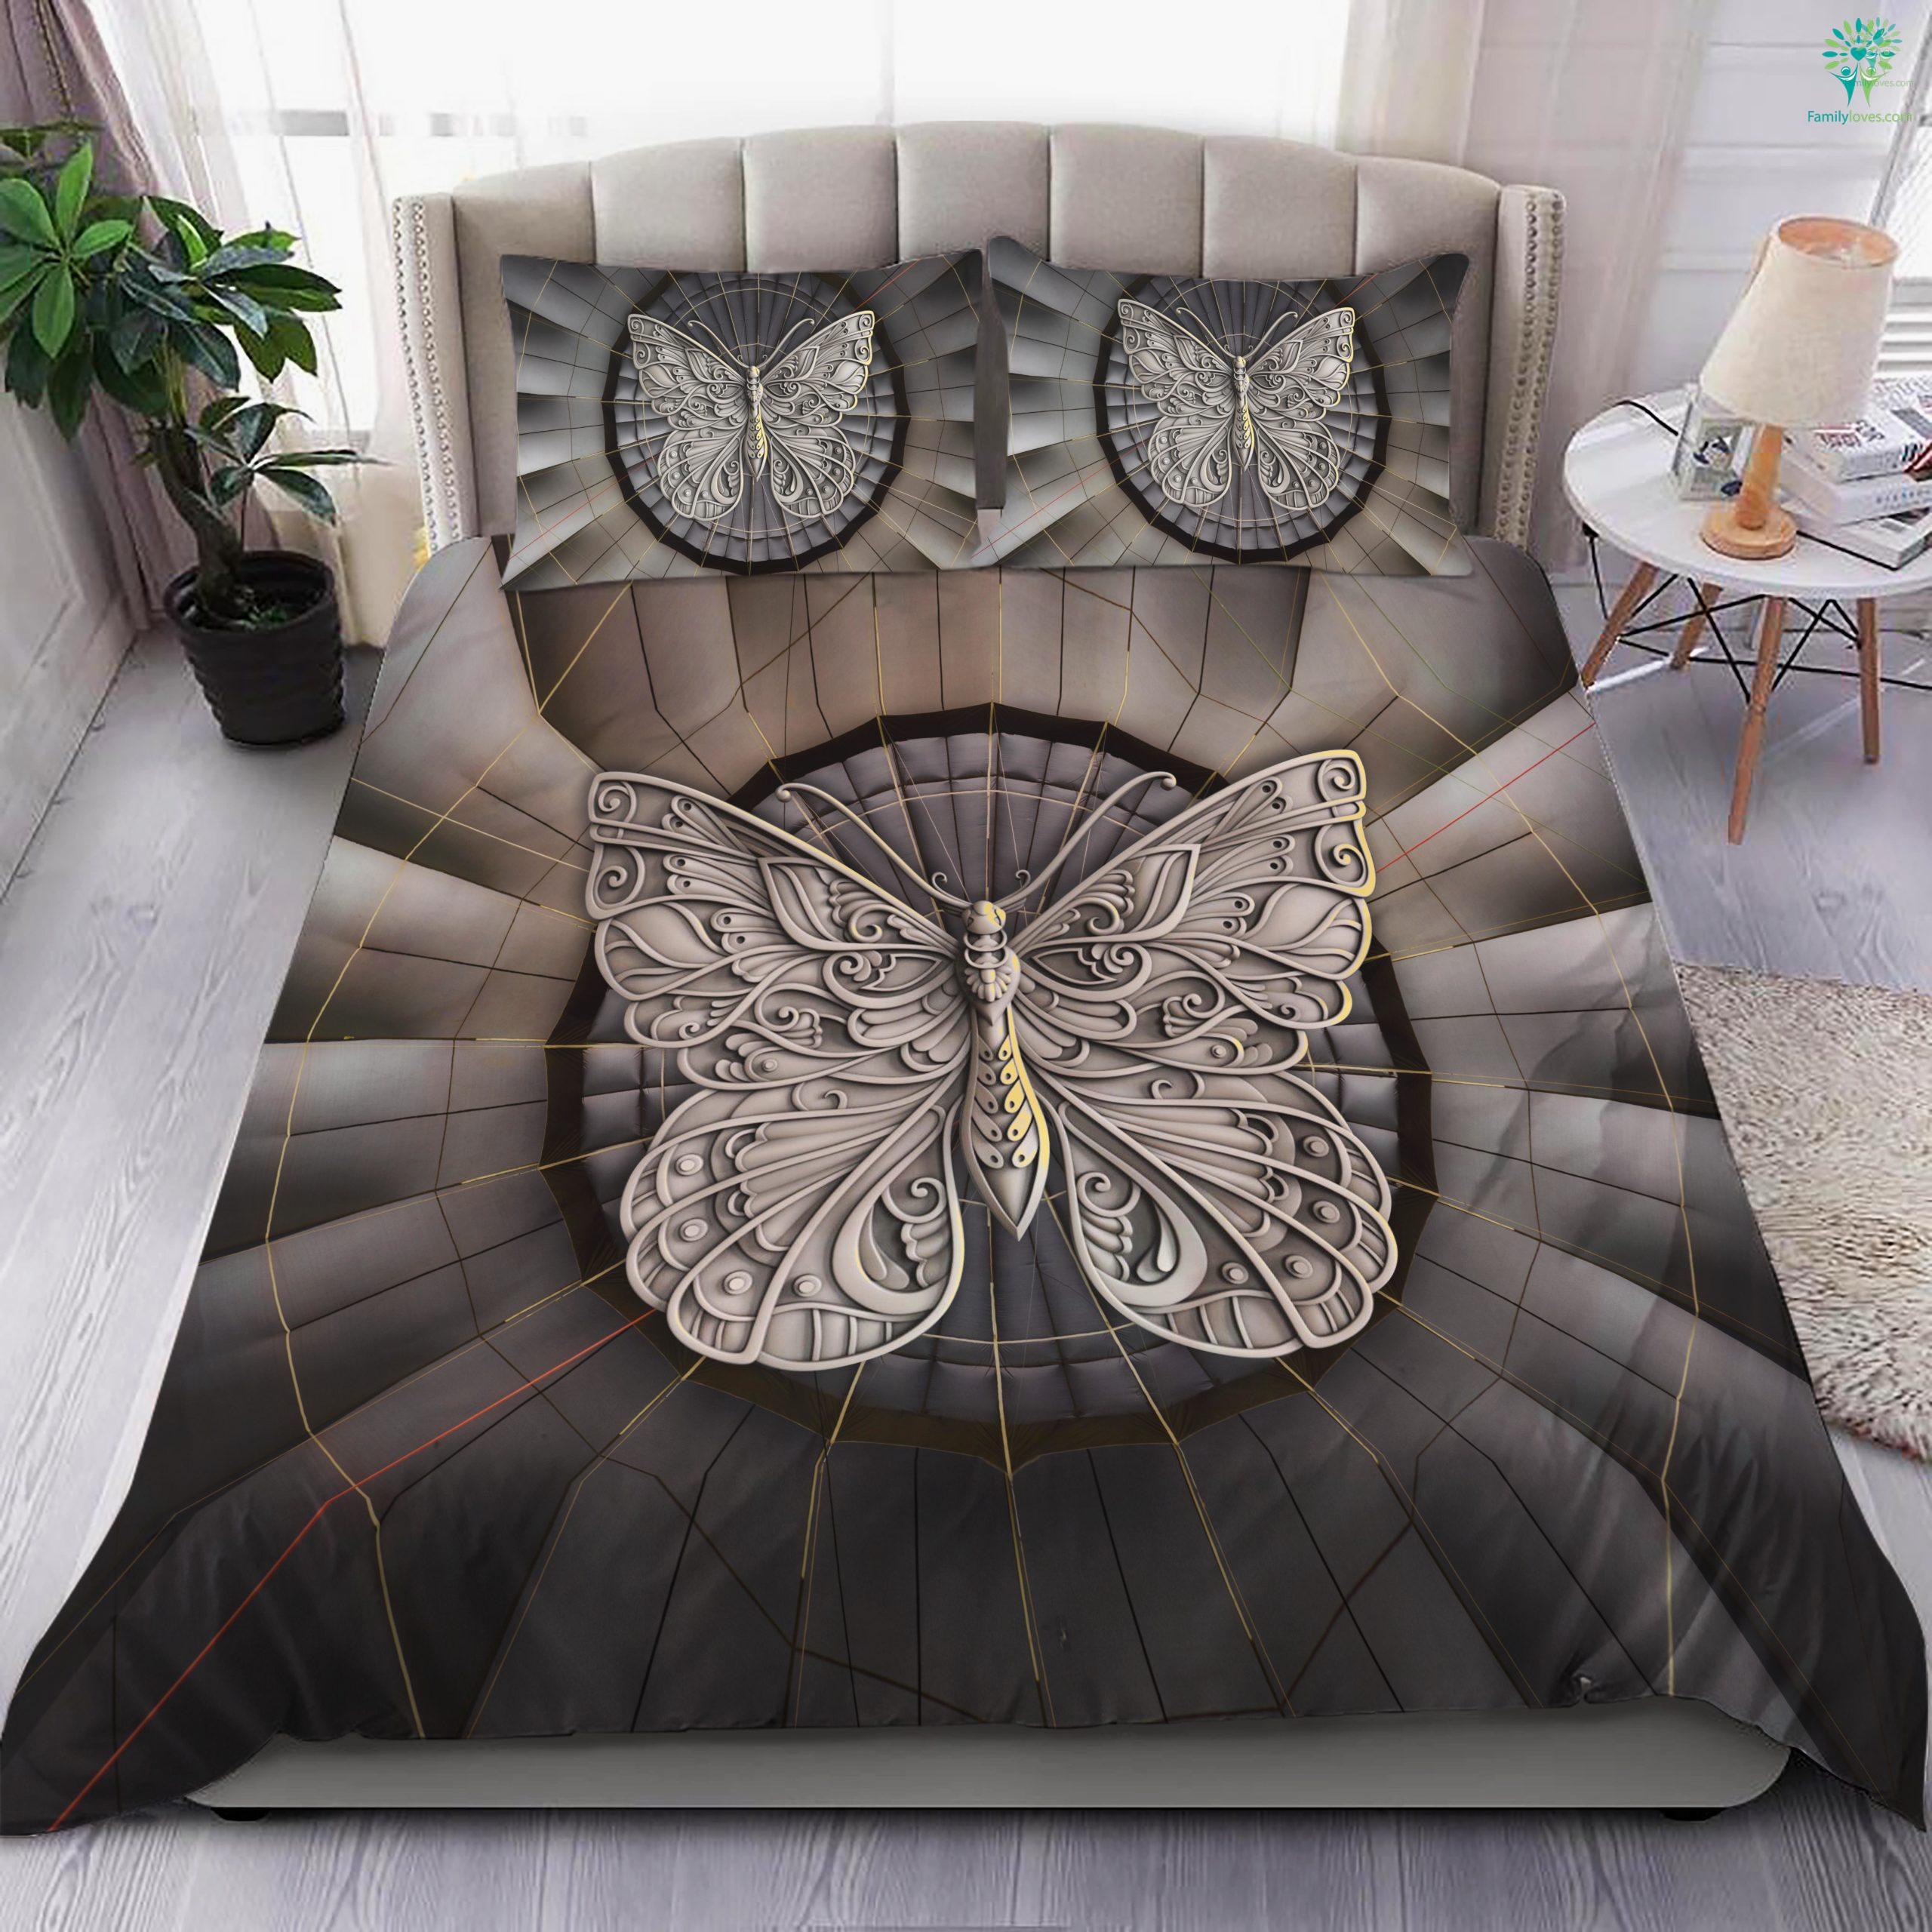 Butterfly Sculpture Bedding Set - Family Loves US Military Veterans Shirts Gifts Ideas